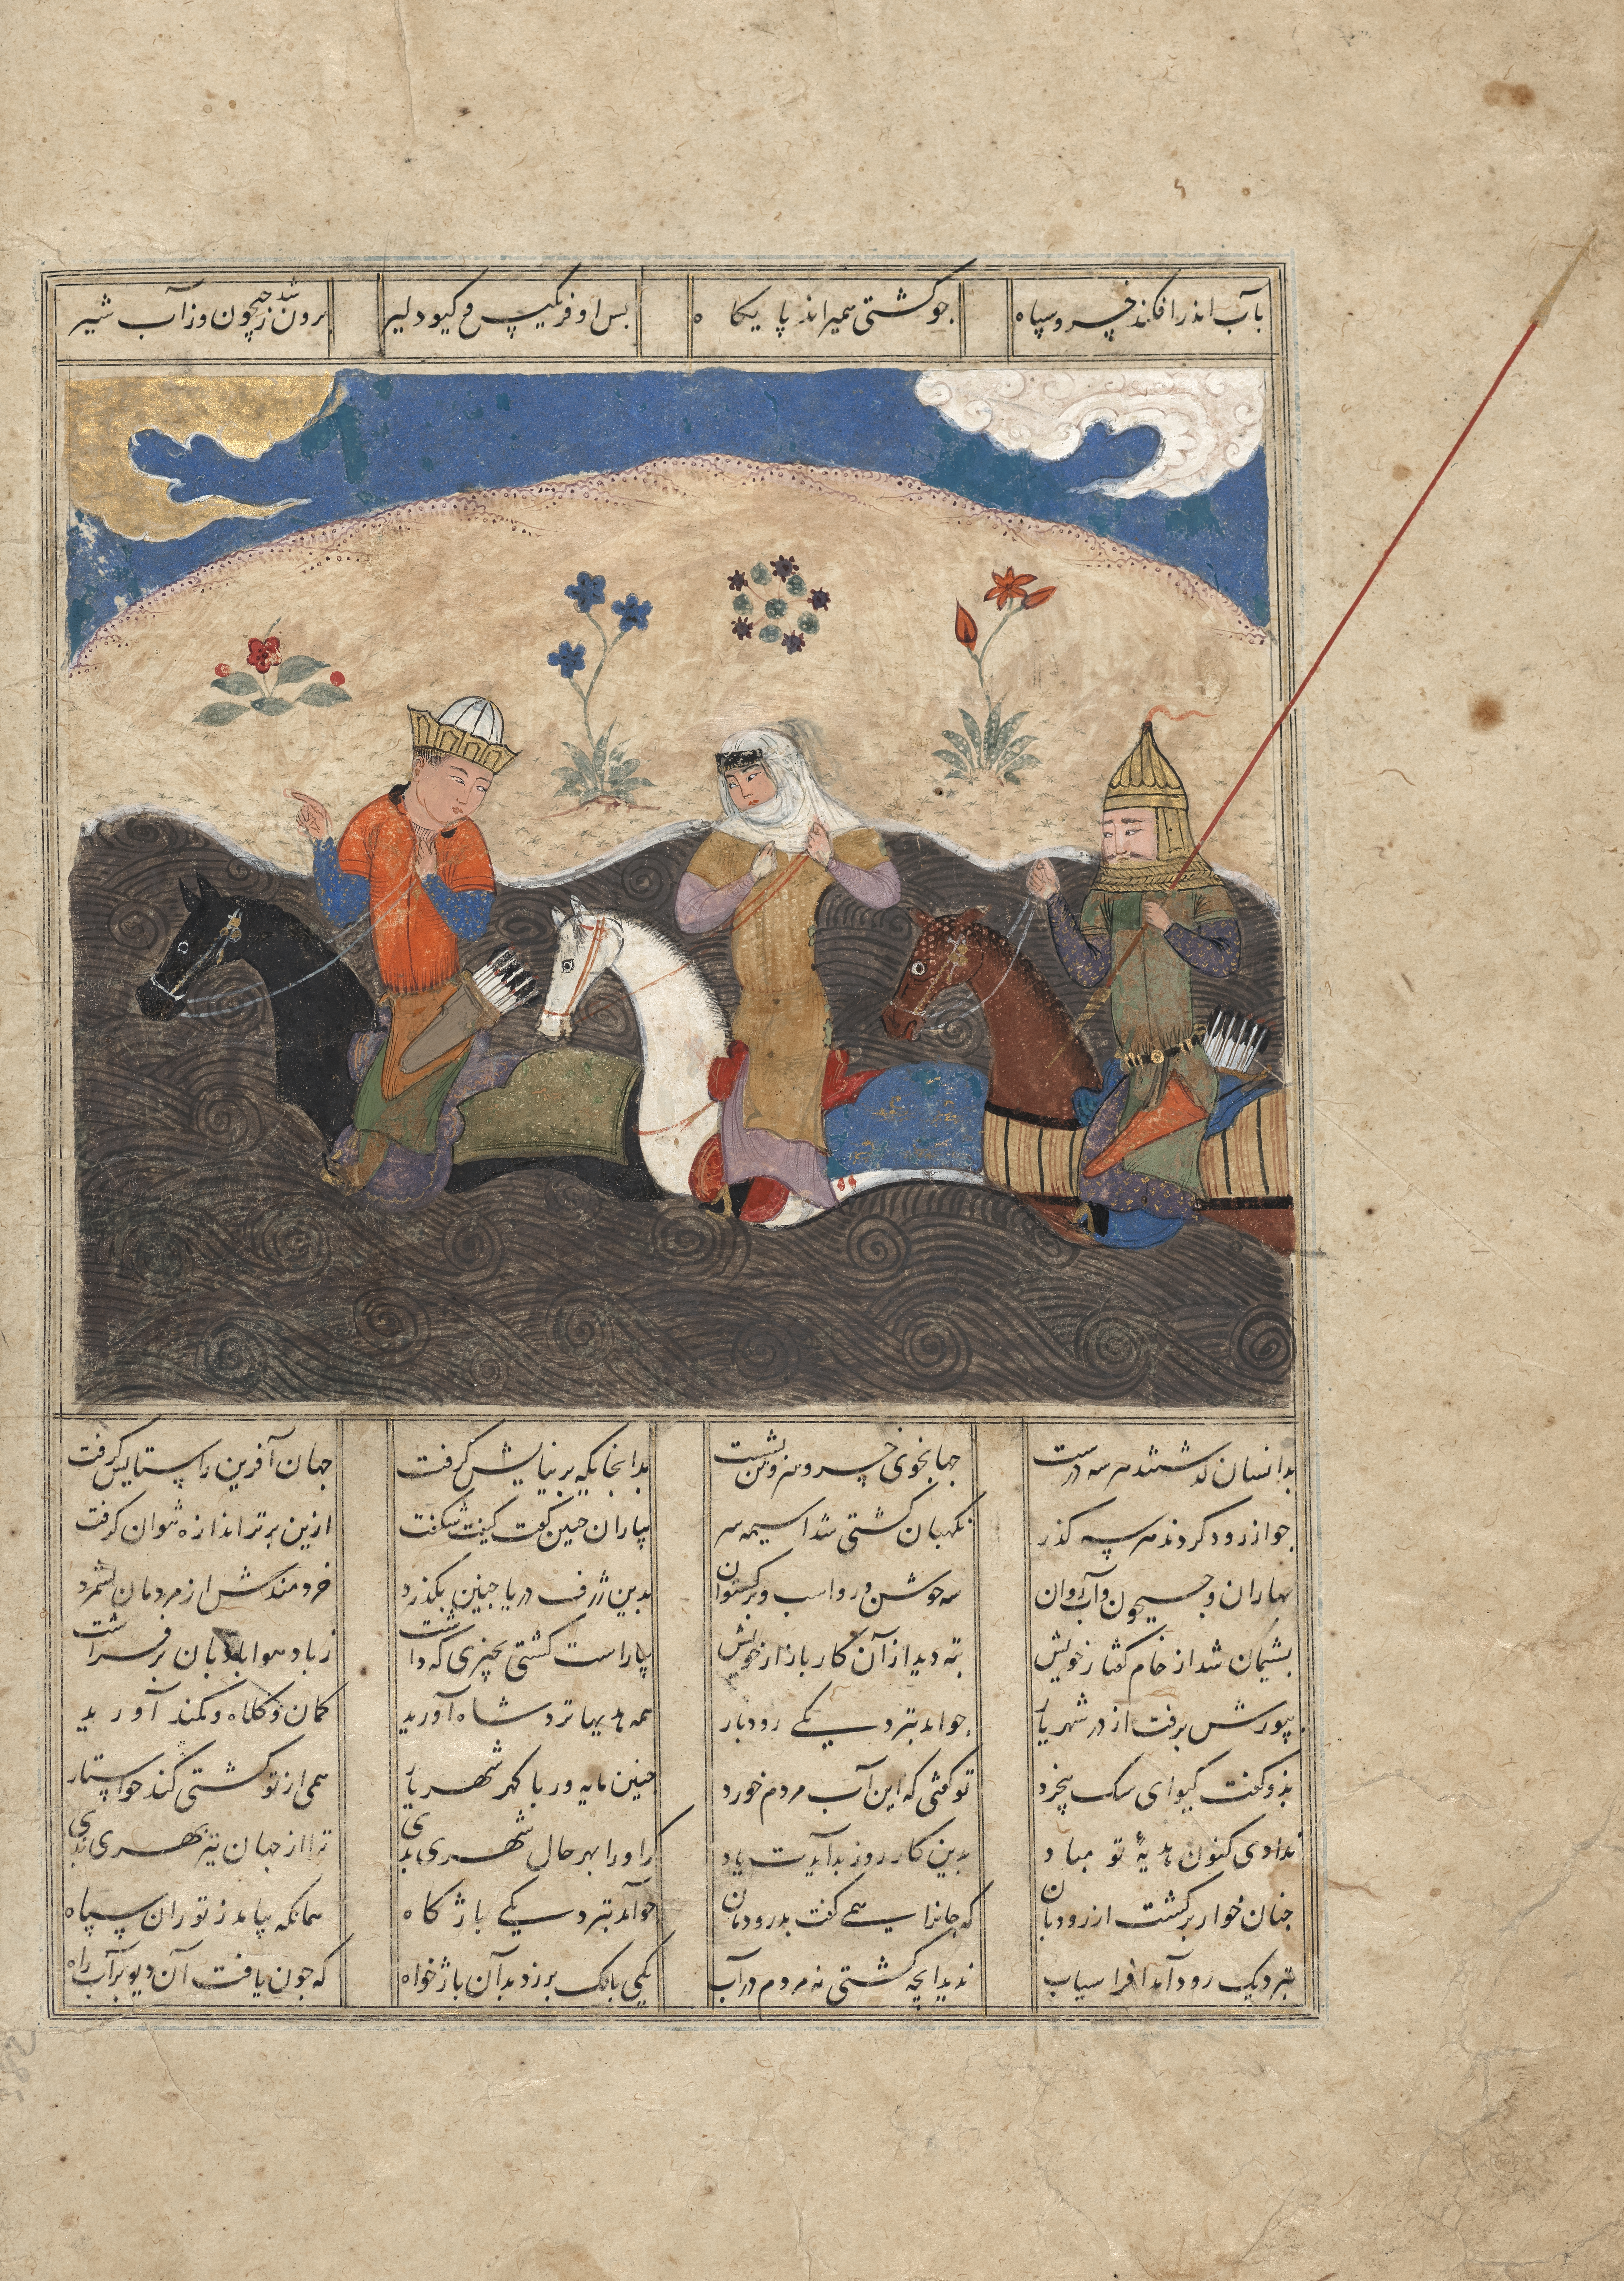 Painting of three people riding on horse in a stylized river with the script of another language around the page